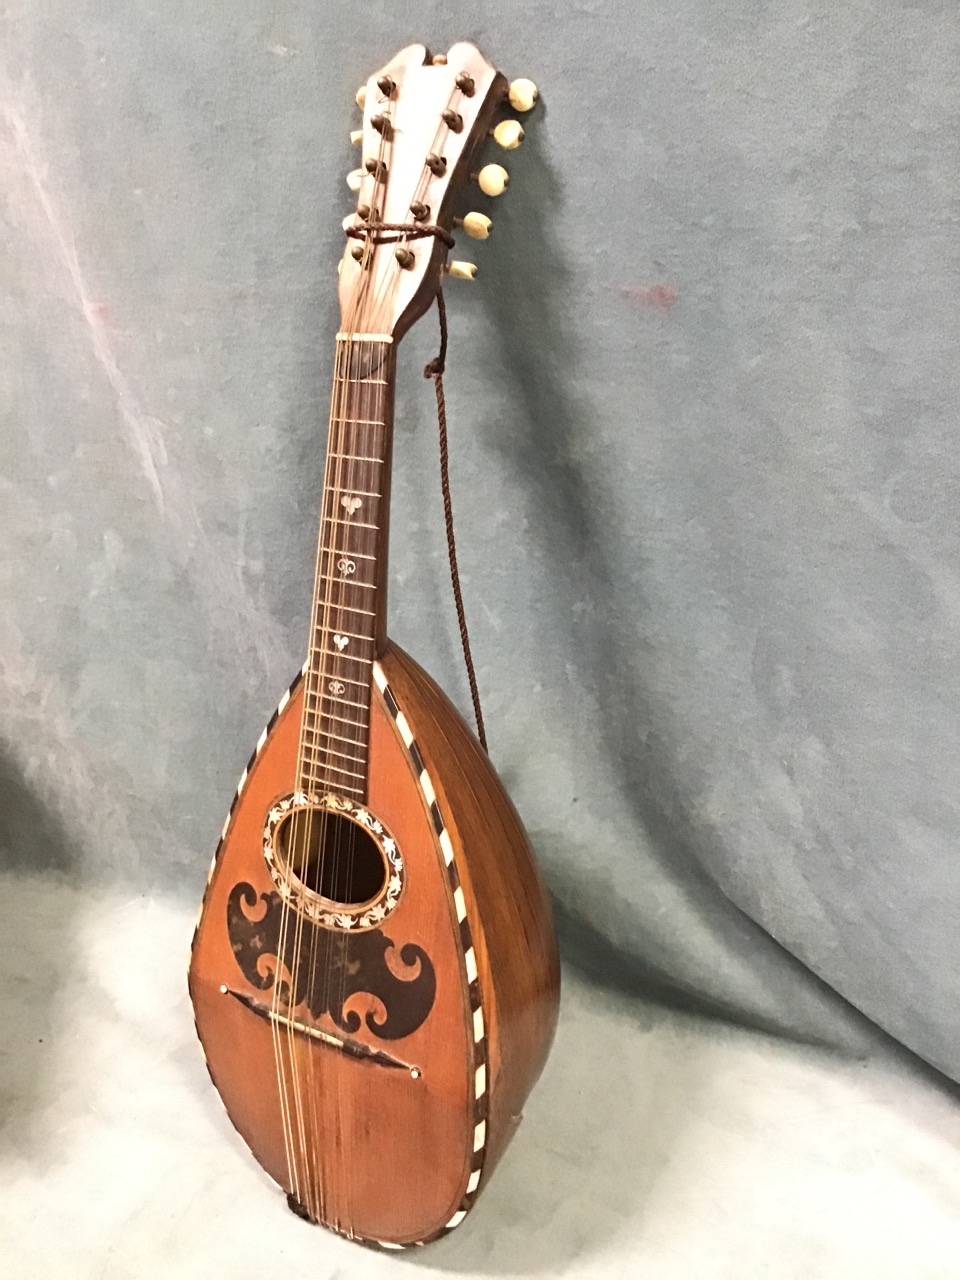 A C19th cased Neapolitan mandolin by Giuseppe Vinaccia, the pear shaped walnut ribbed back and - Image 2 of 3